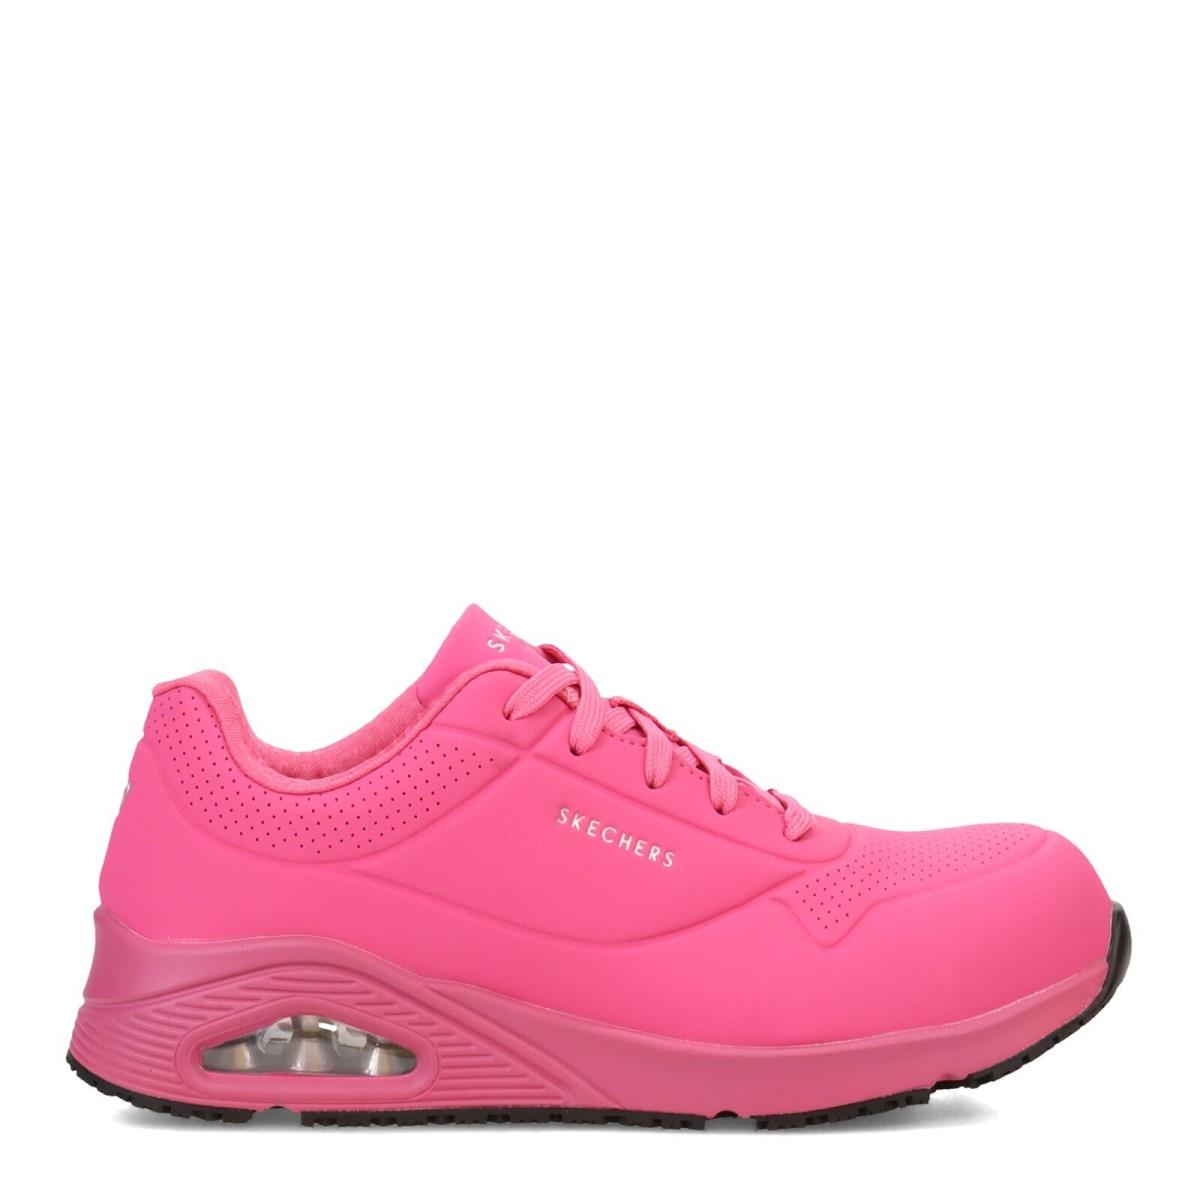 Skechers Women`s Work Relaxed Fit Uno Slip-resistant Odor Free Air-cooled Shoes Pink